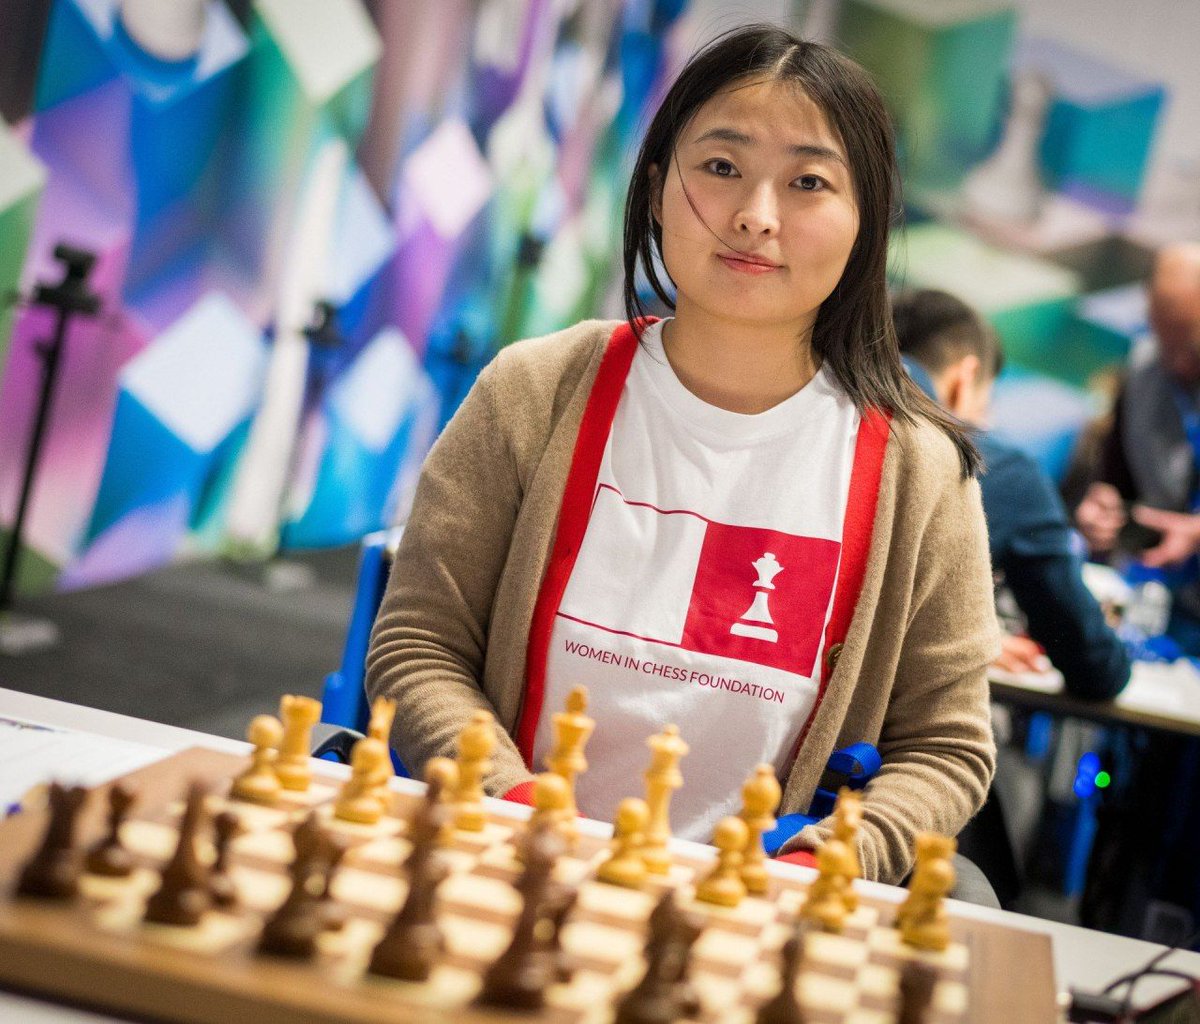 Happy birthday to the reigning Women's World Champion Ju Wenjun! 🥳 
She recently took part in the #TataSteelChess Masters notably winning against Firouzja and drawing with Nepomniachtchi and Ding Liren, ending the tournament winning 10 Elo points.